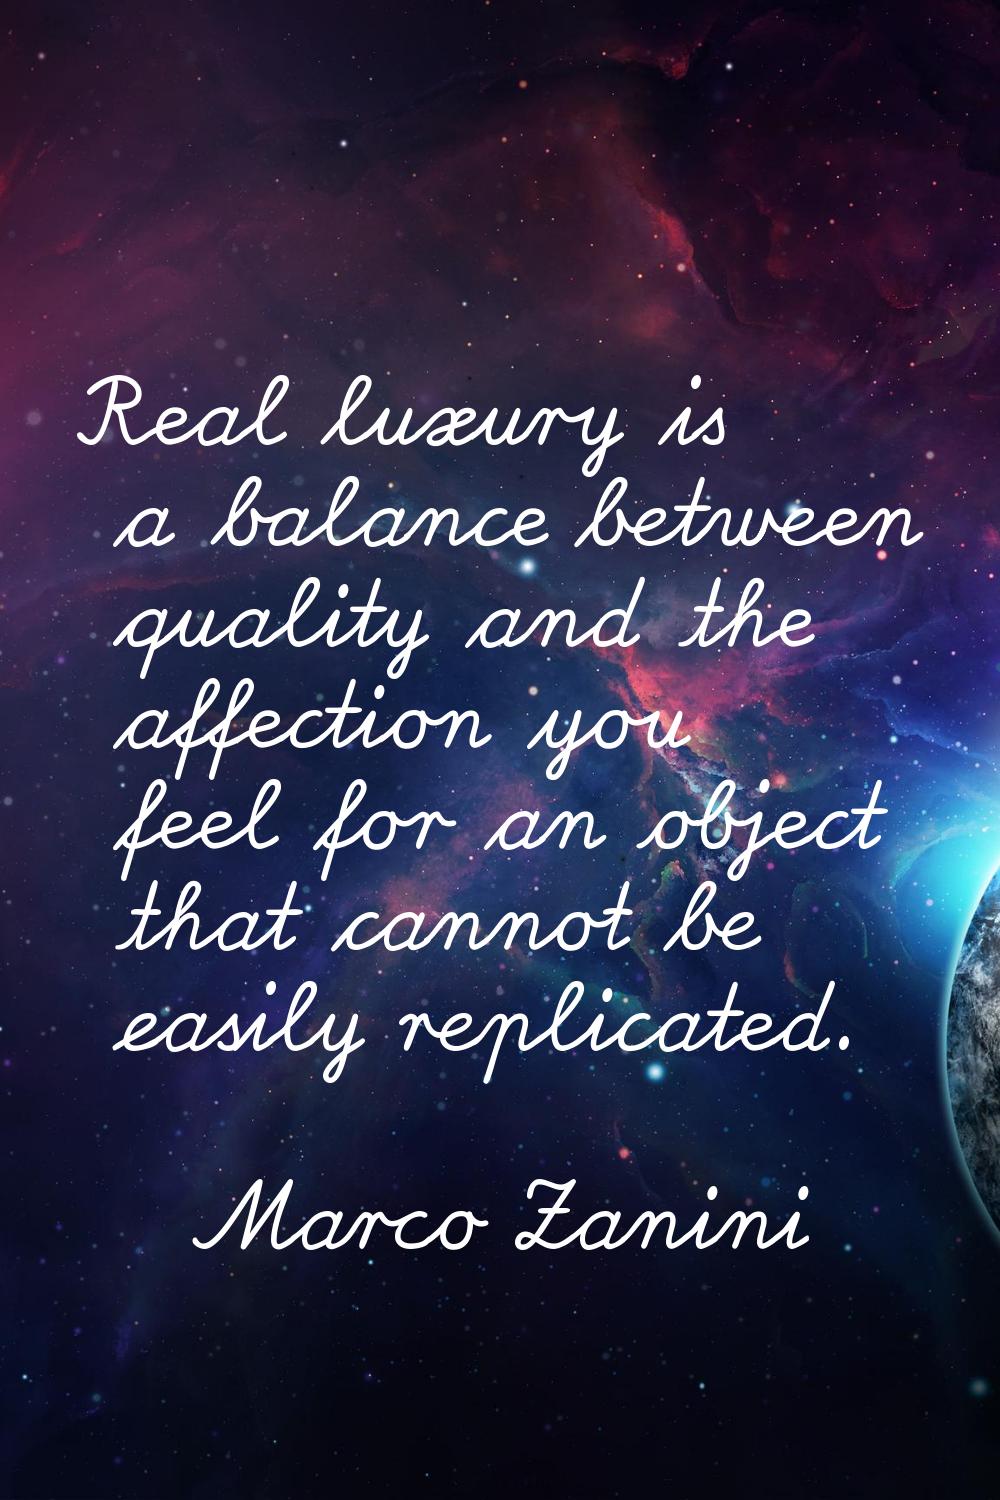 Real luxury is a balance between quality and the affection you feel for an object that cannot be ea